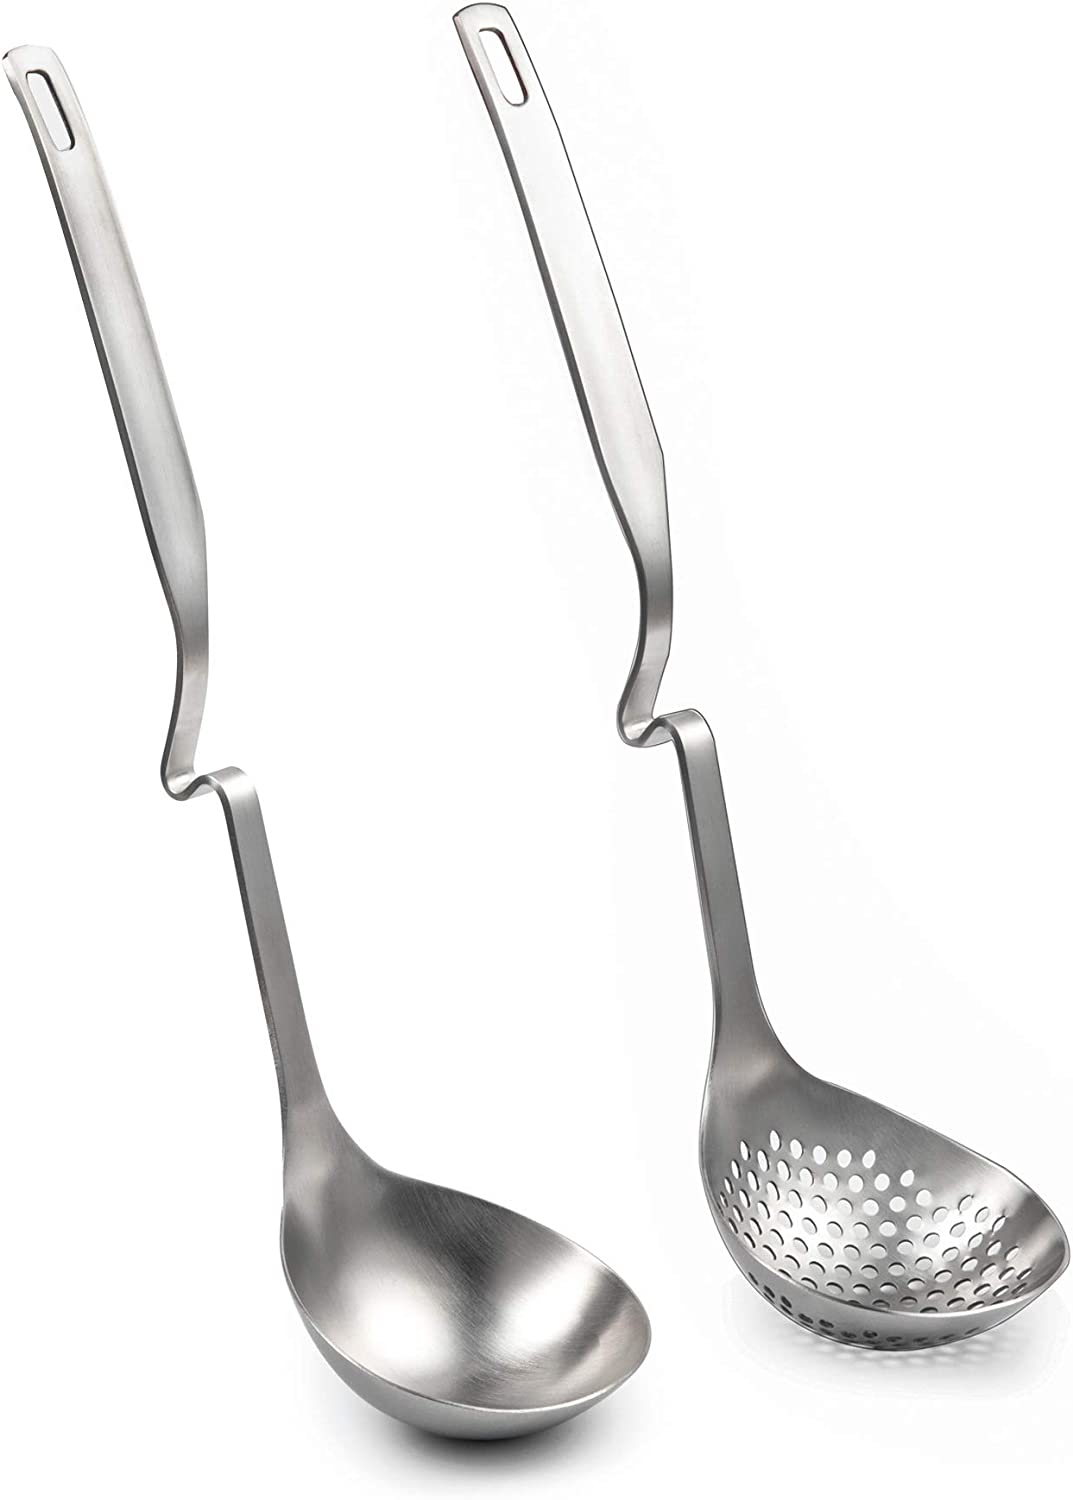 IMEEA Hot Pot Ladle Set Slotted Spoons for Cooking SUS304 Stainless Steel Soup Ladles